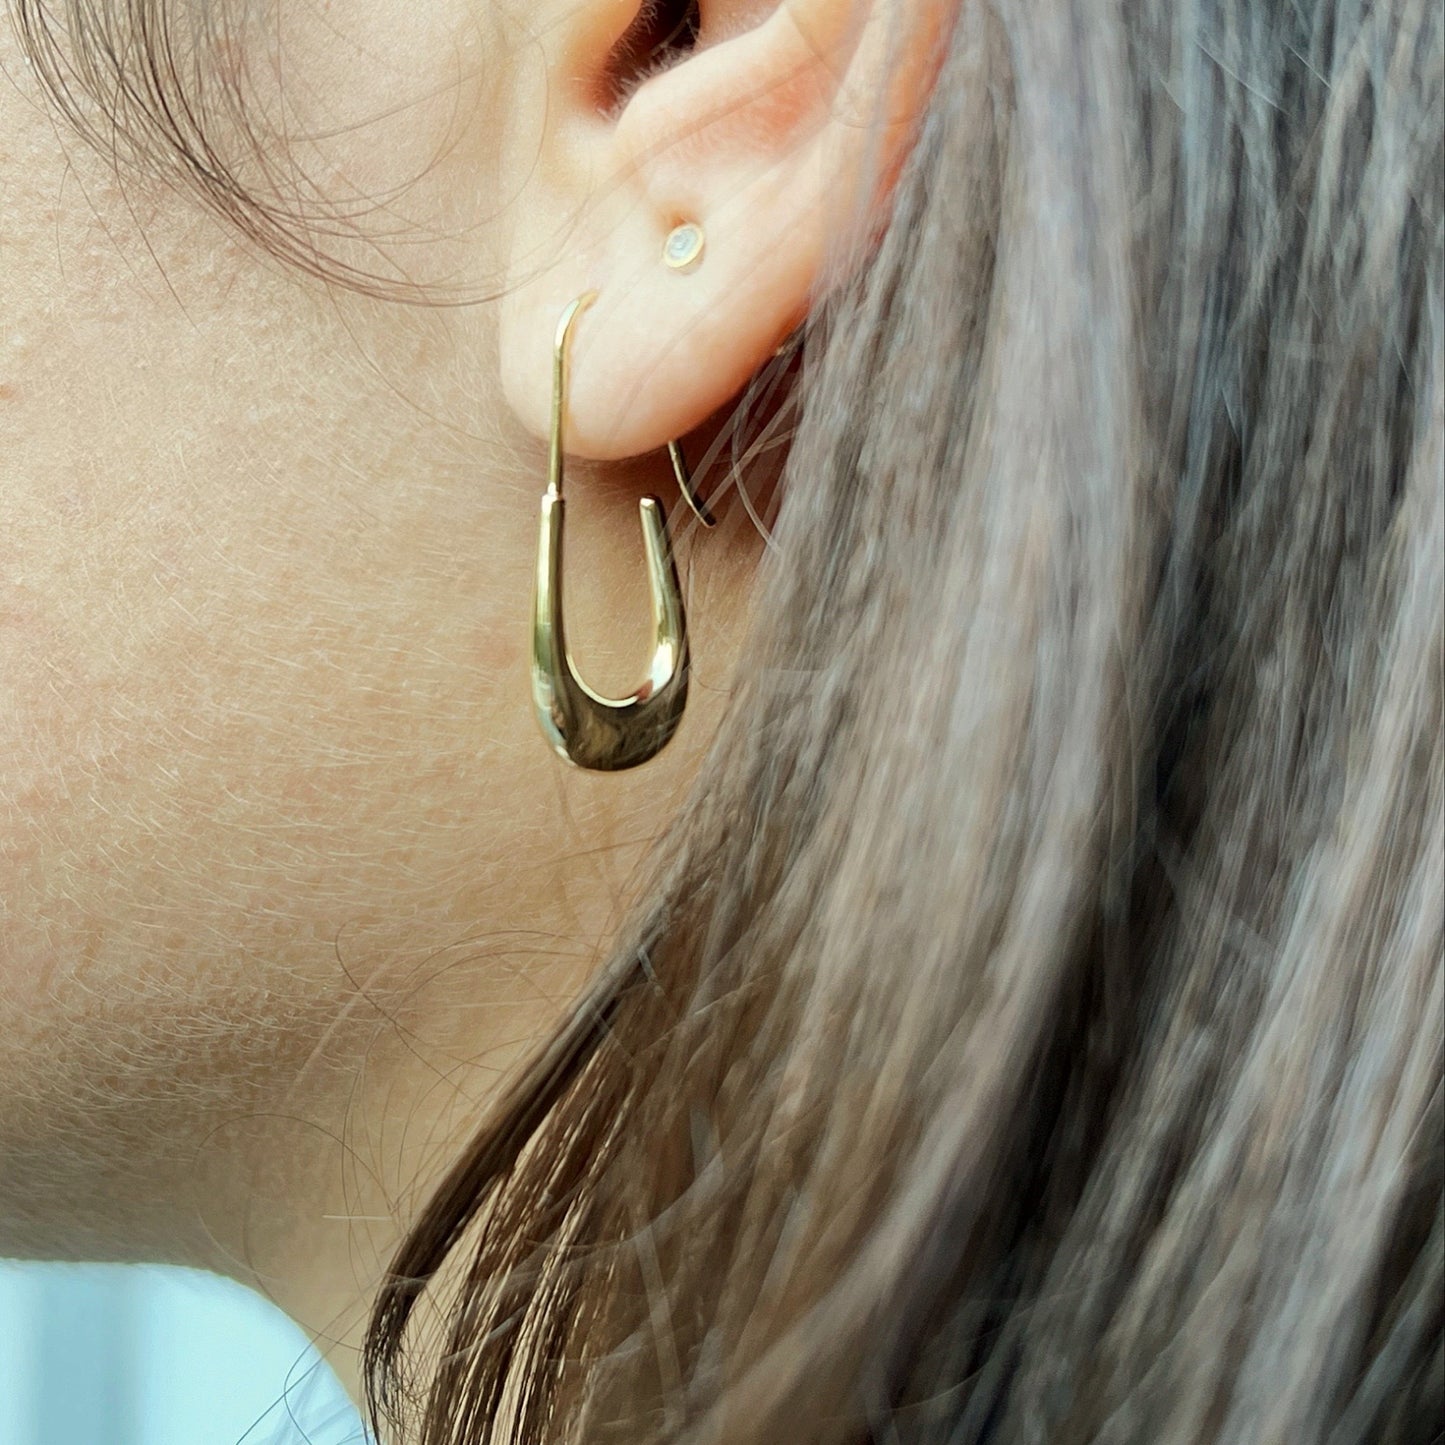 Safety Pin 2.0 Earrings